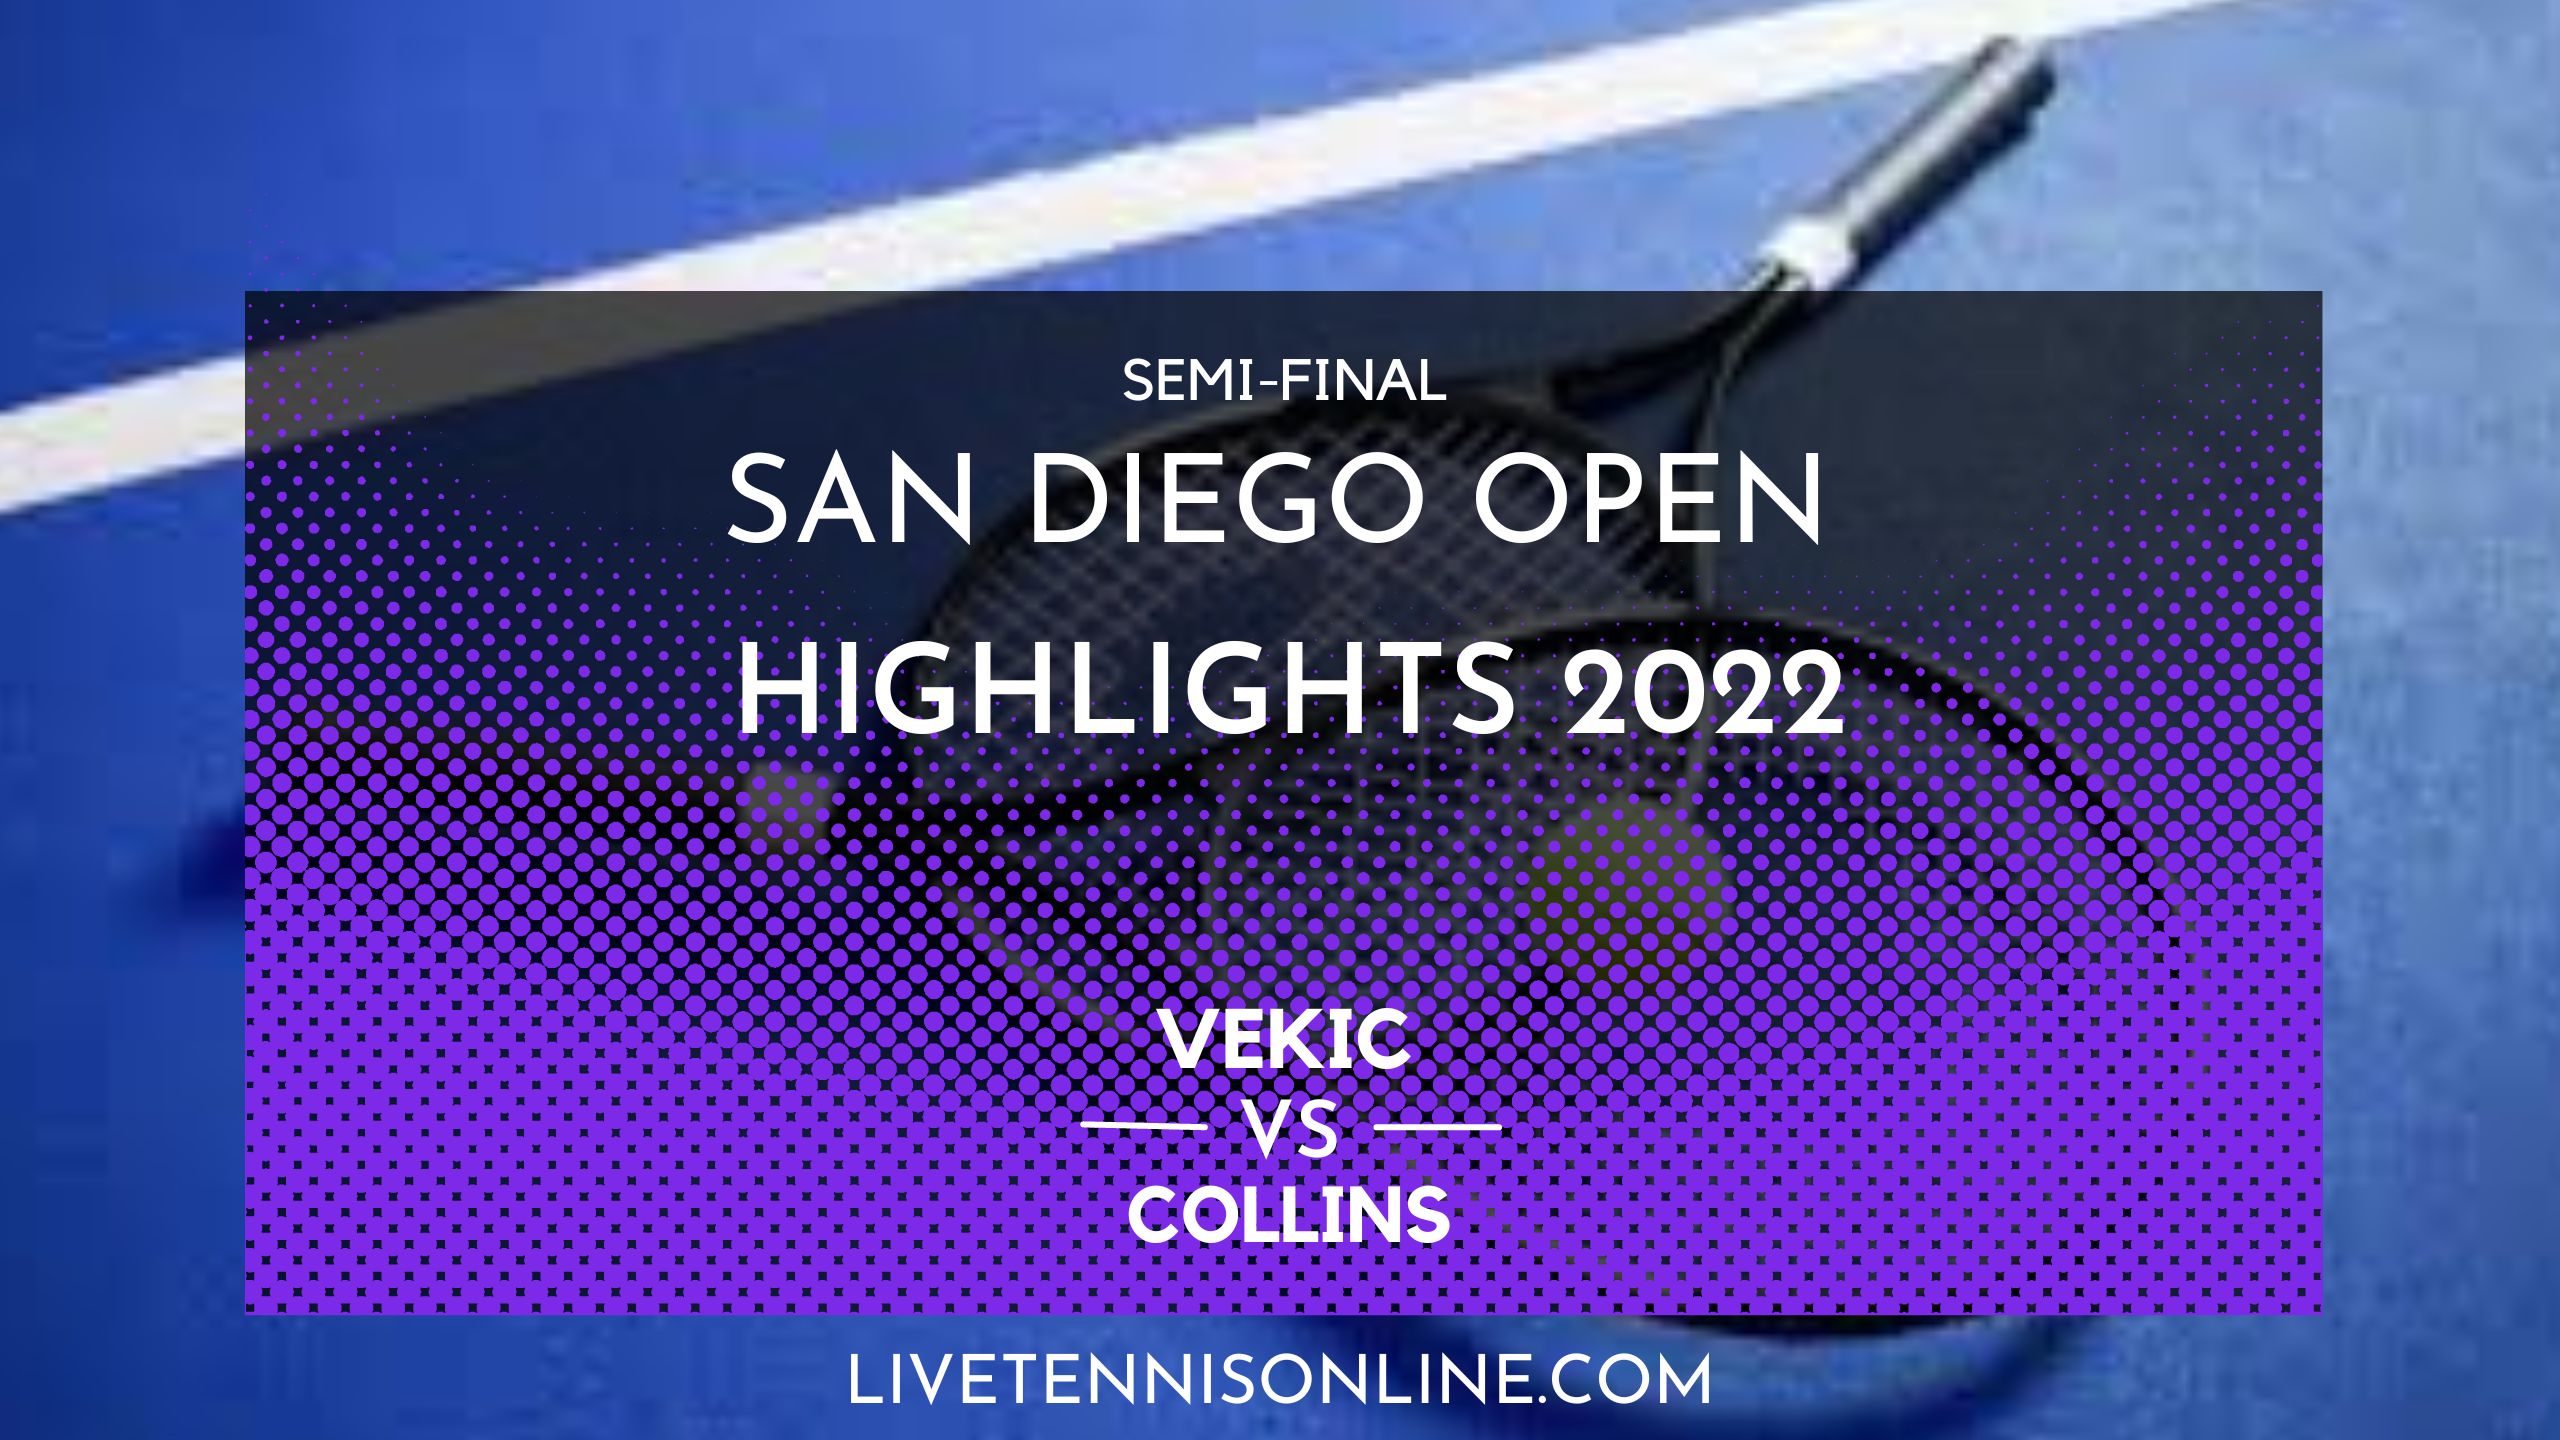 Vekic Vs Collins SF Highlights 2022 San Diego Open